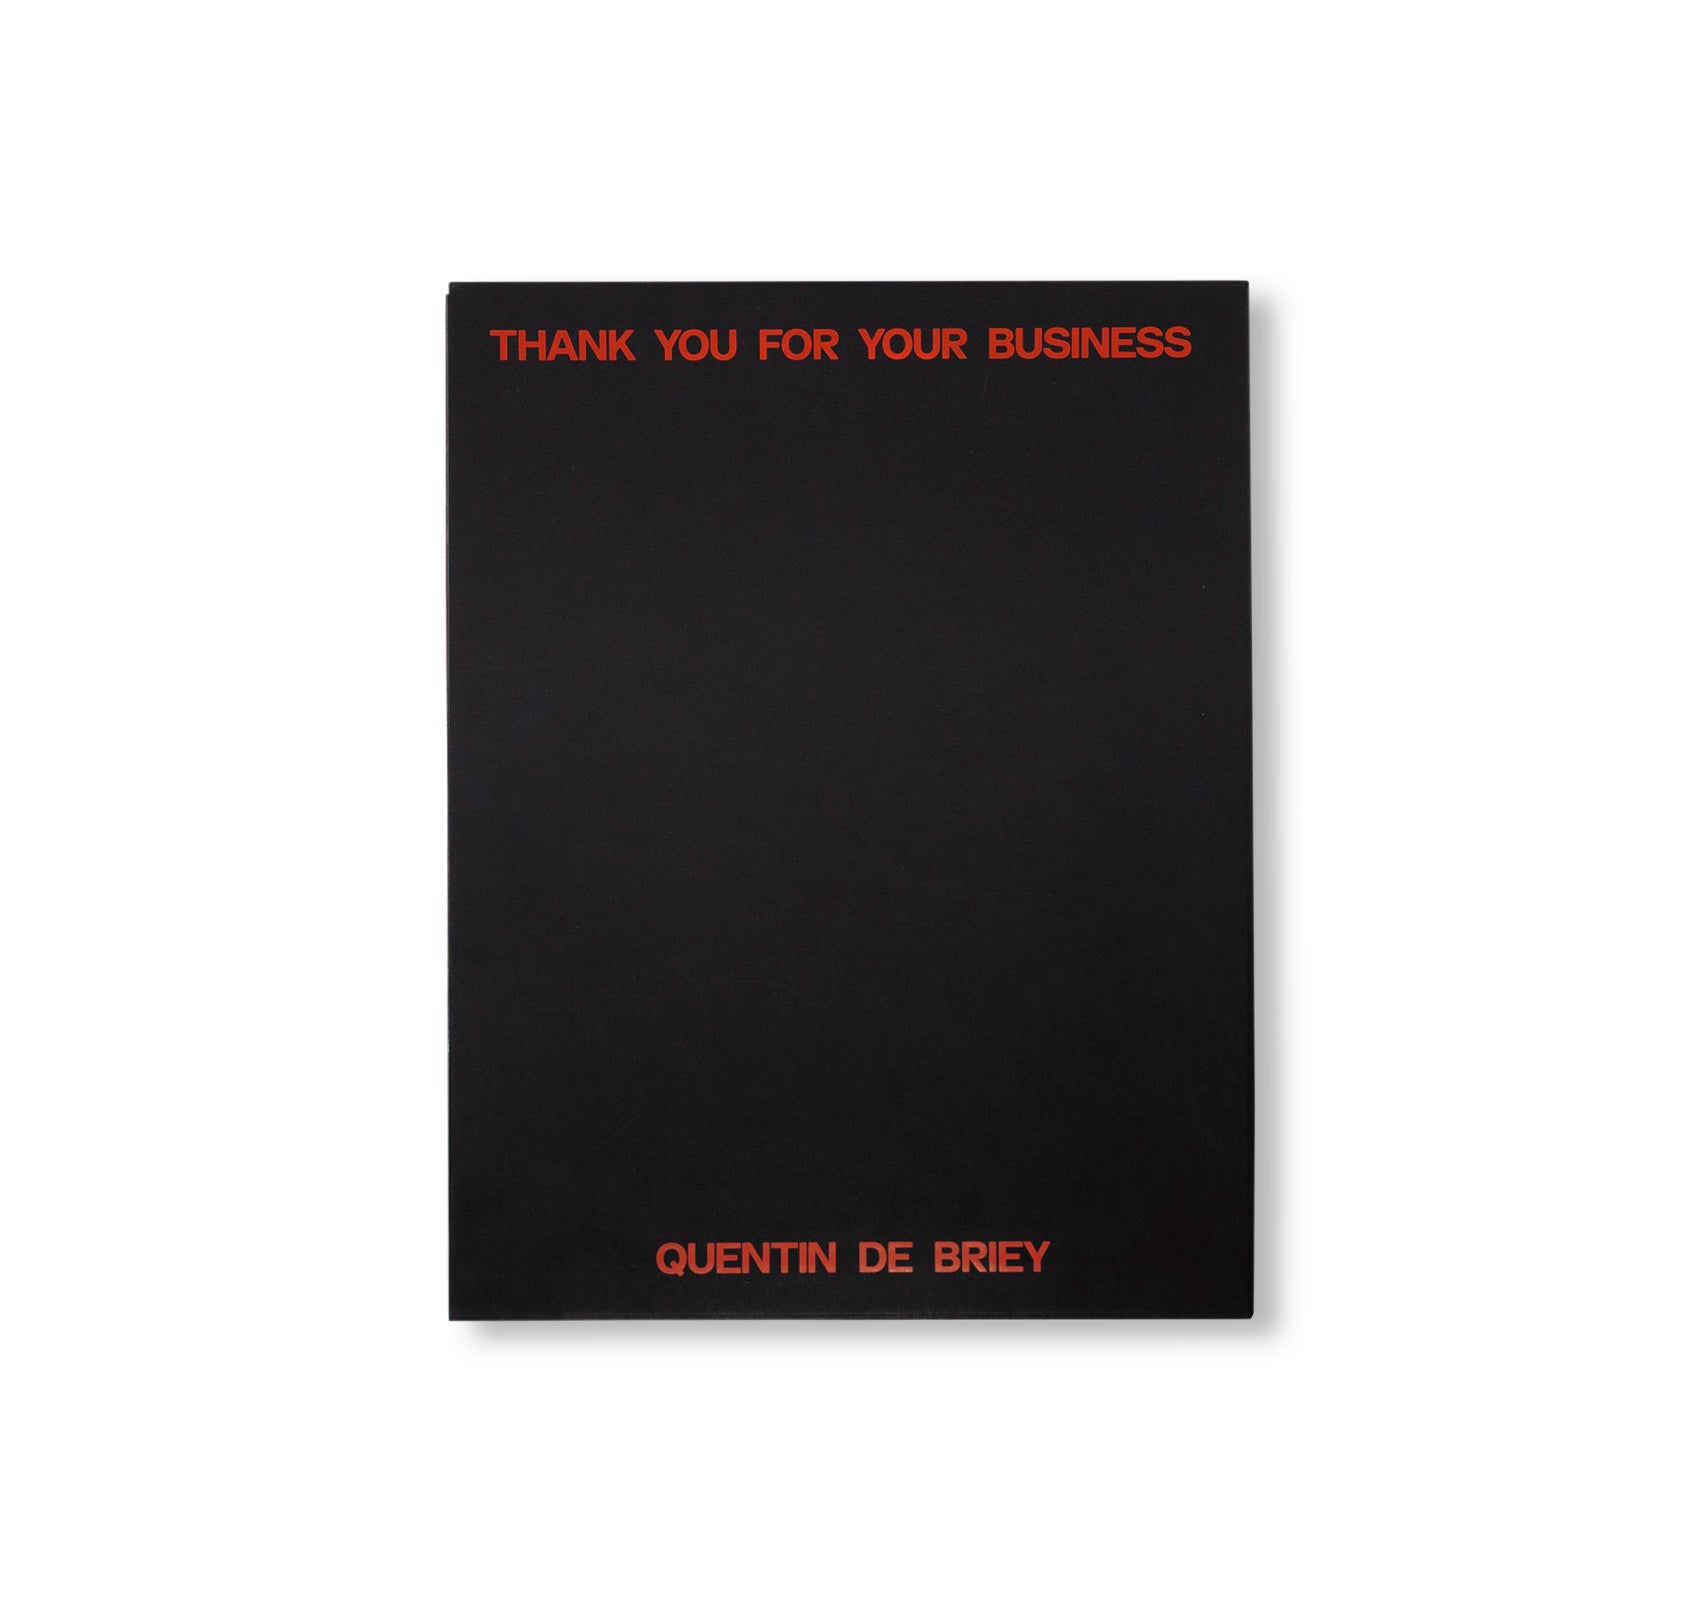 THANK YOU FOR YOUR BUSINESS by Quentin de Briey [SPECIAL EDITION]